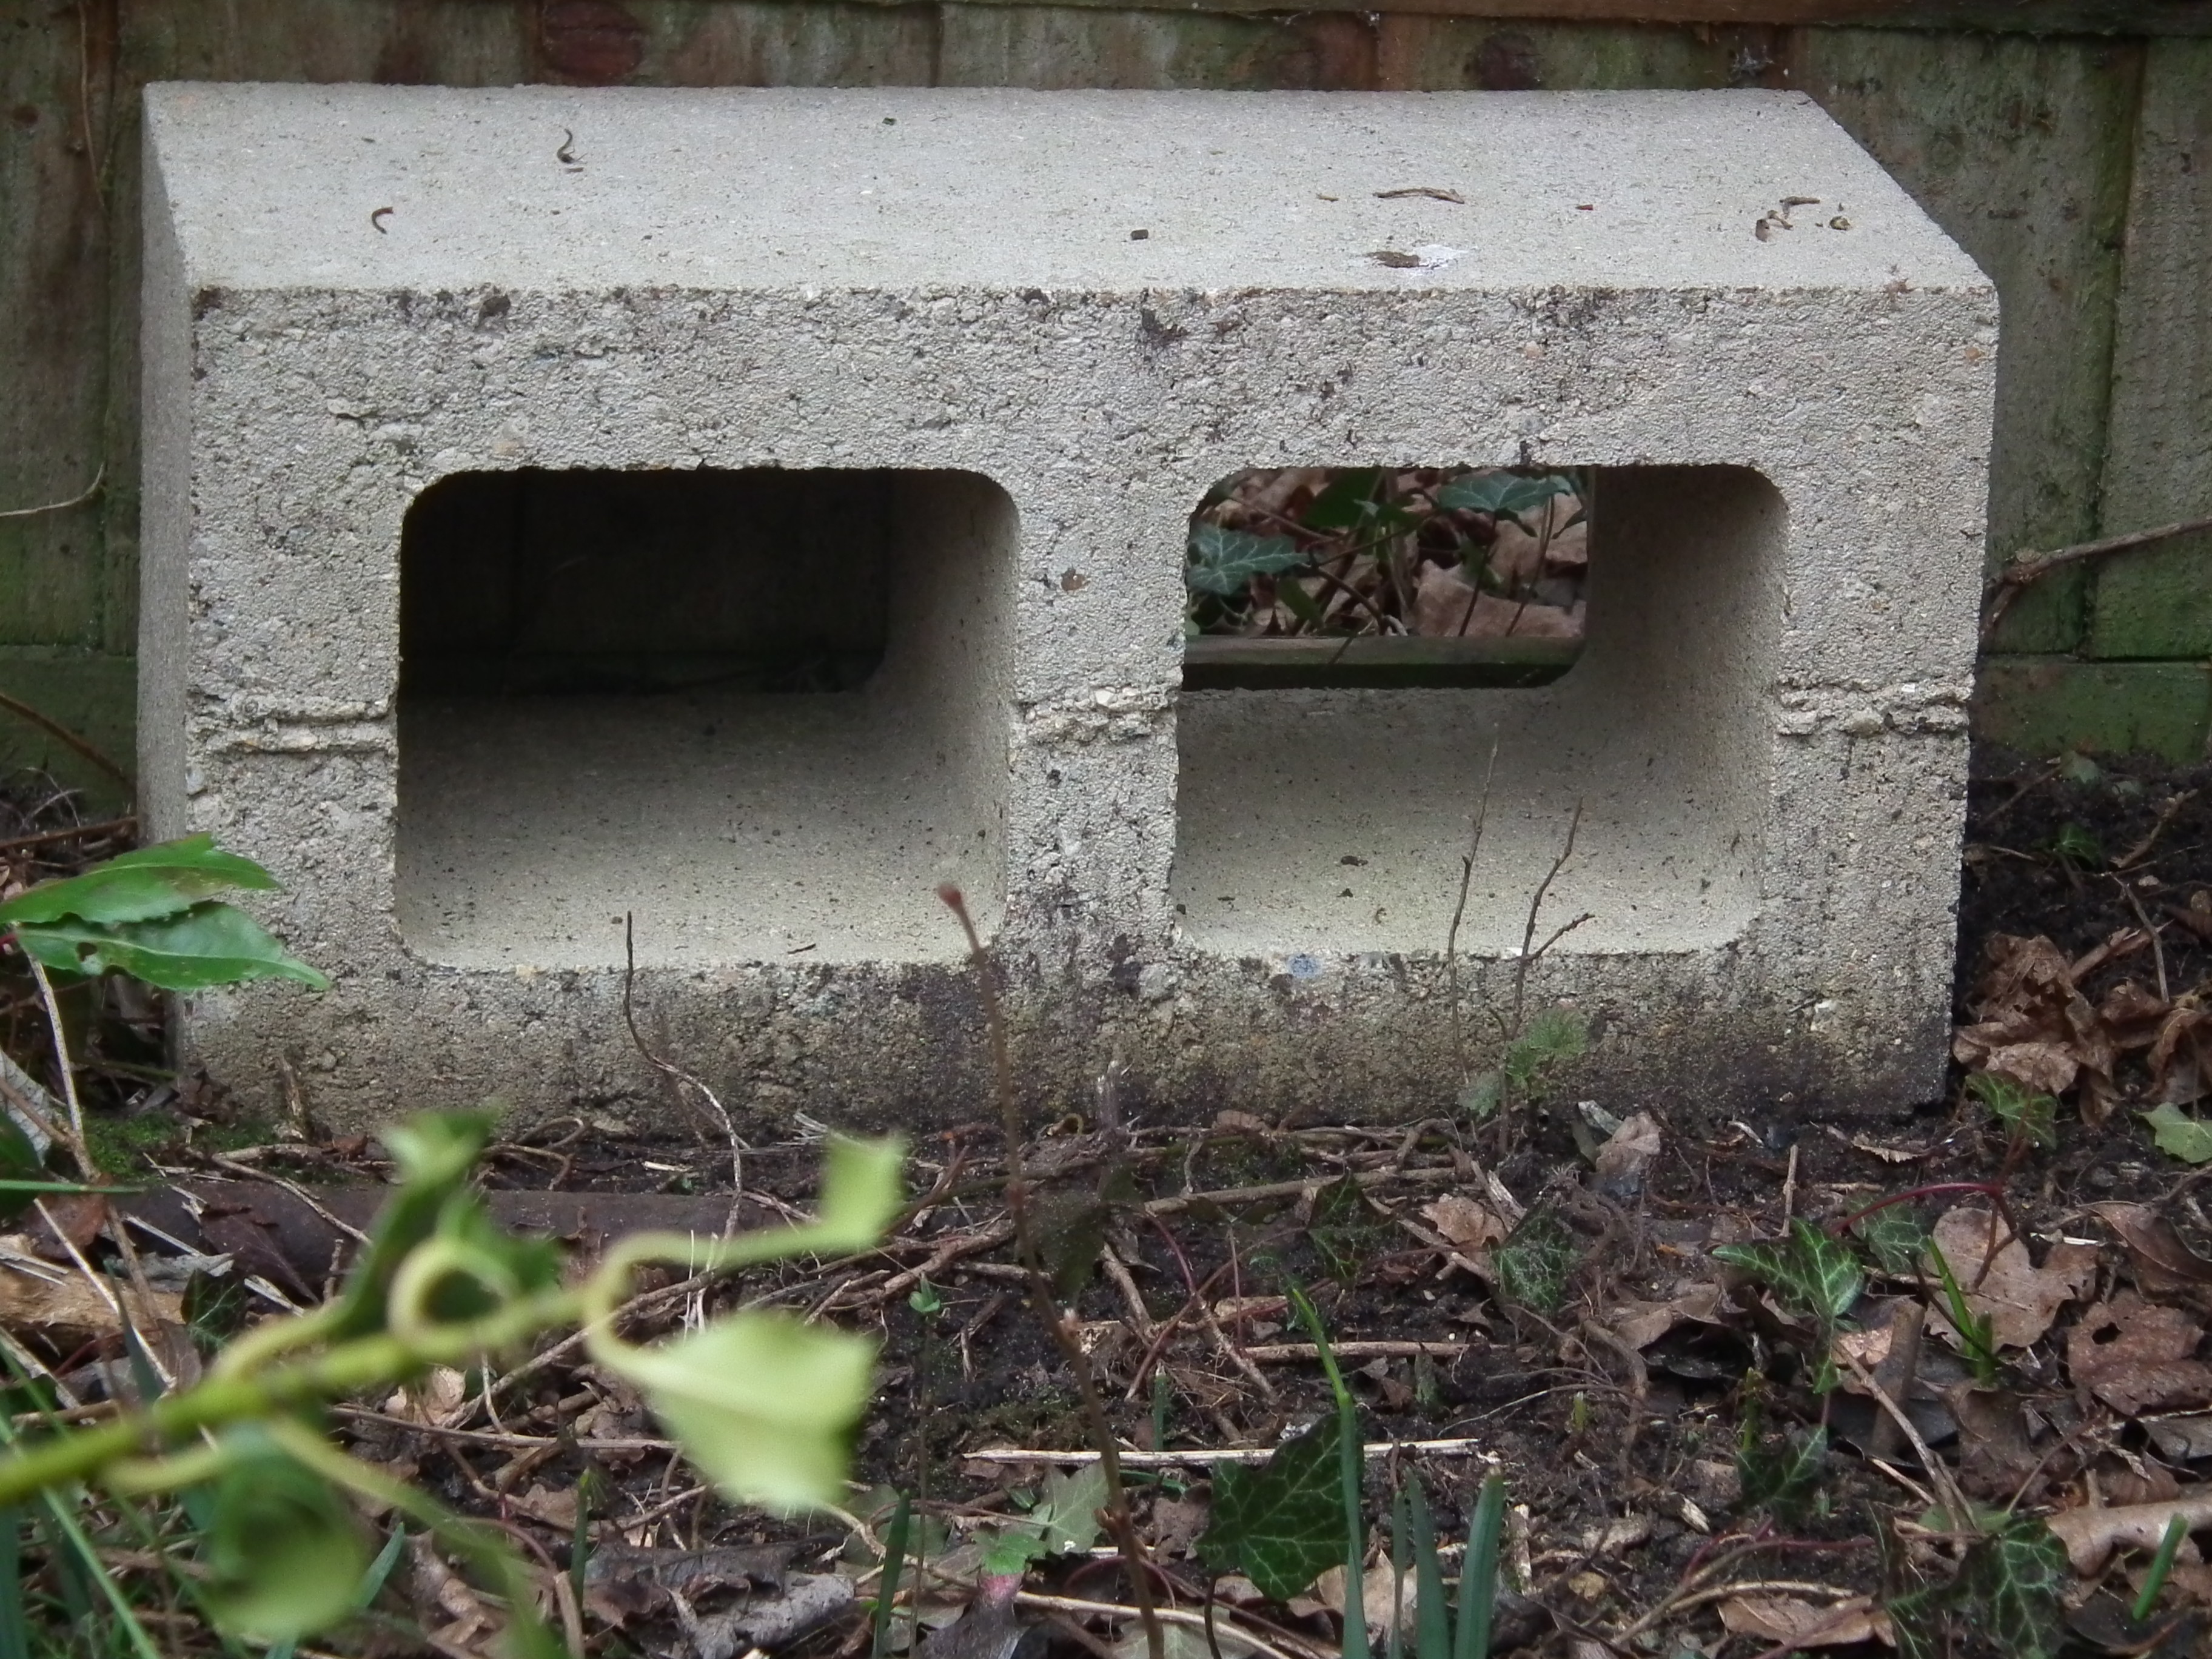 Hedgehog expert Pat Morris pioneered this low tech solution making your hole cat-proof using a breeze block - clever puss!